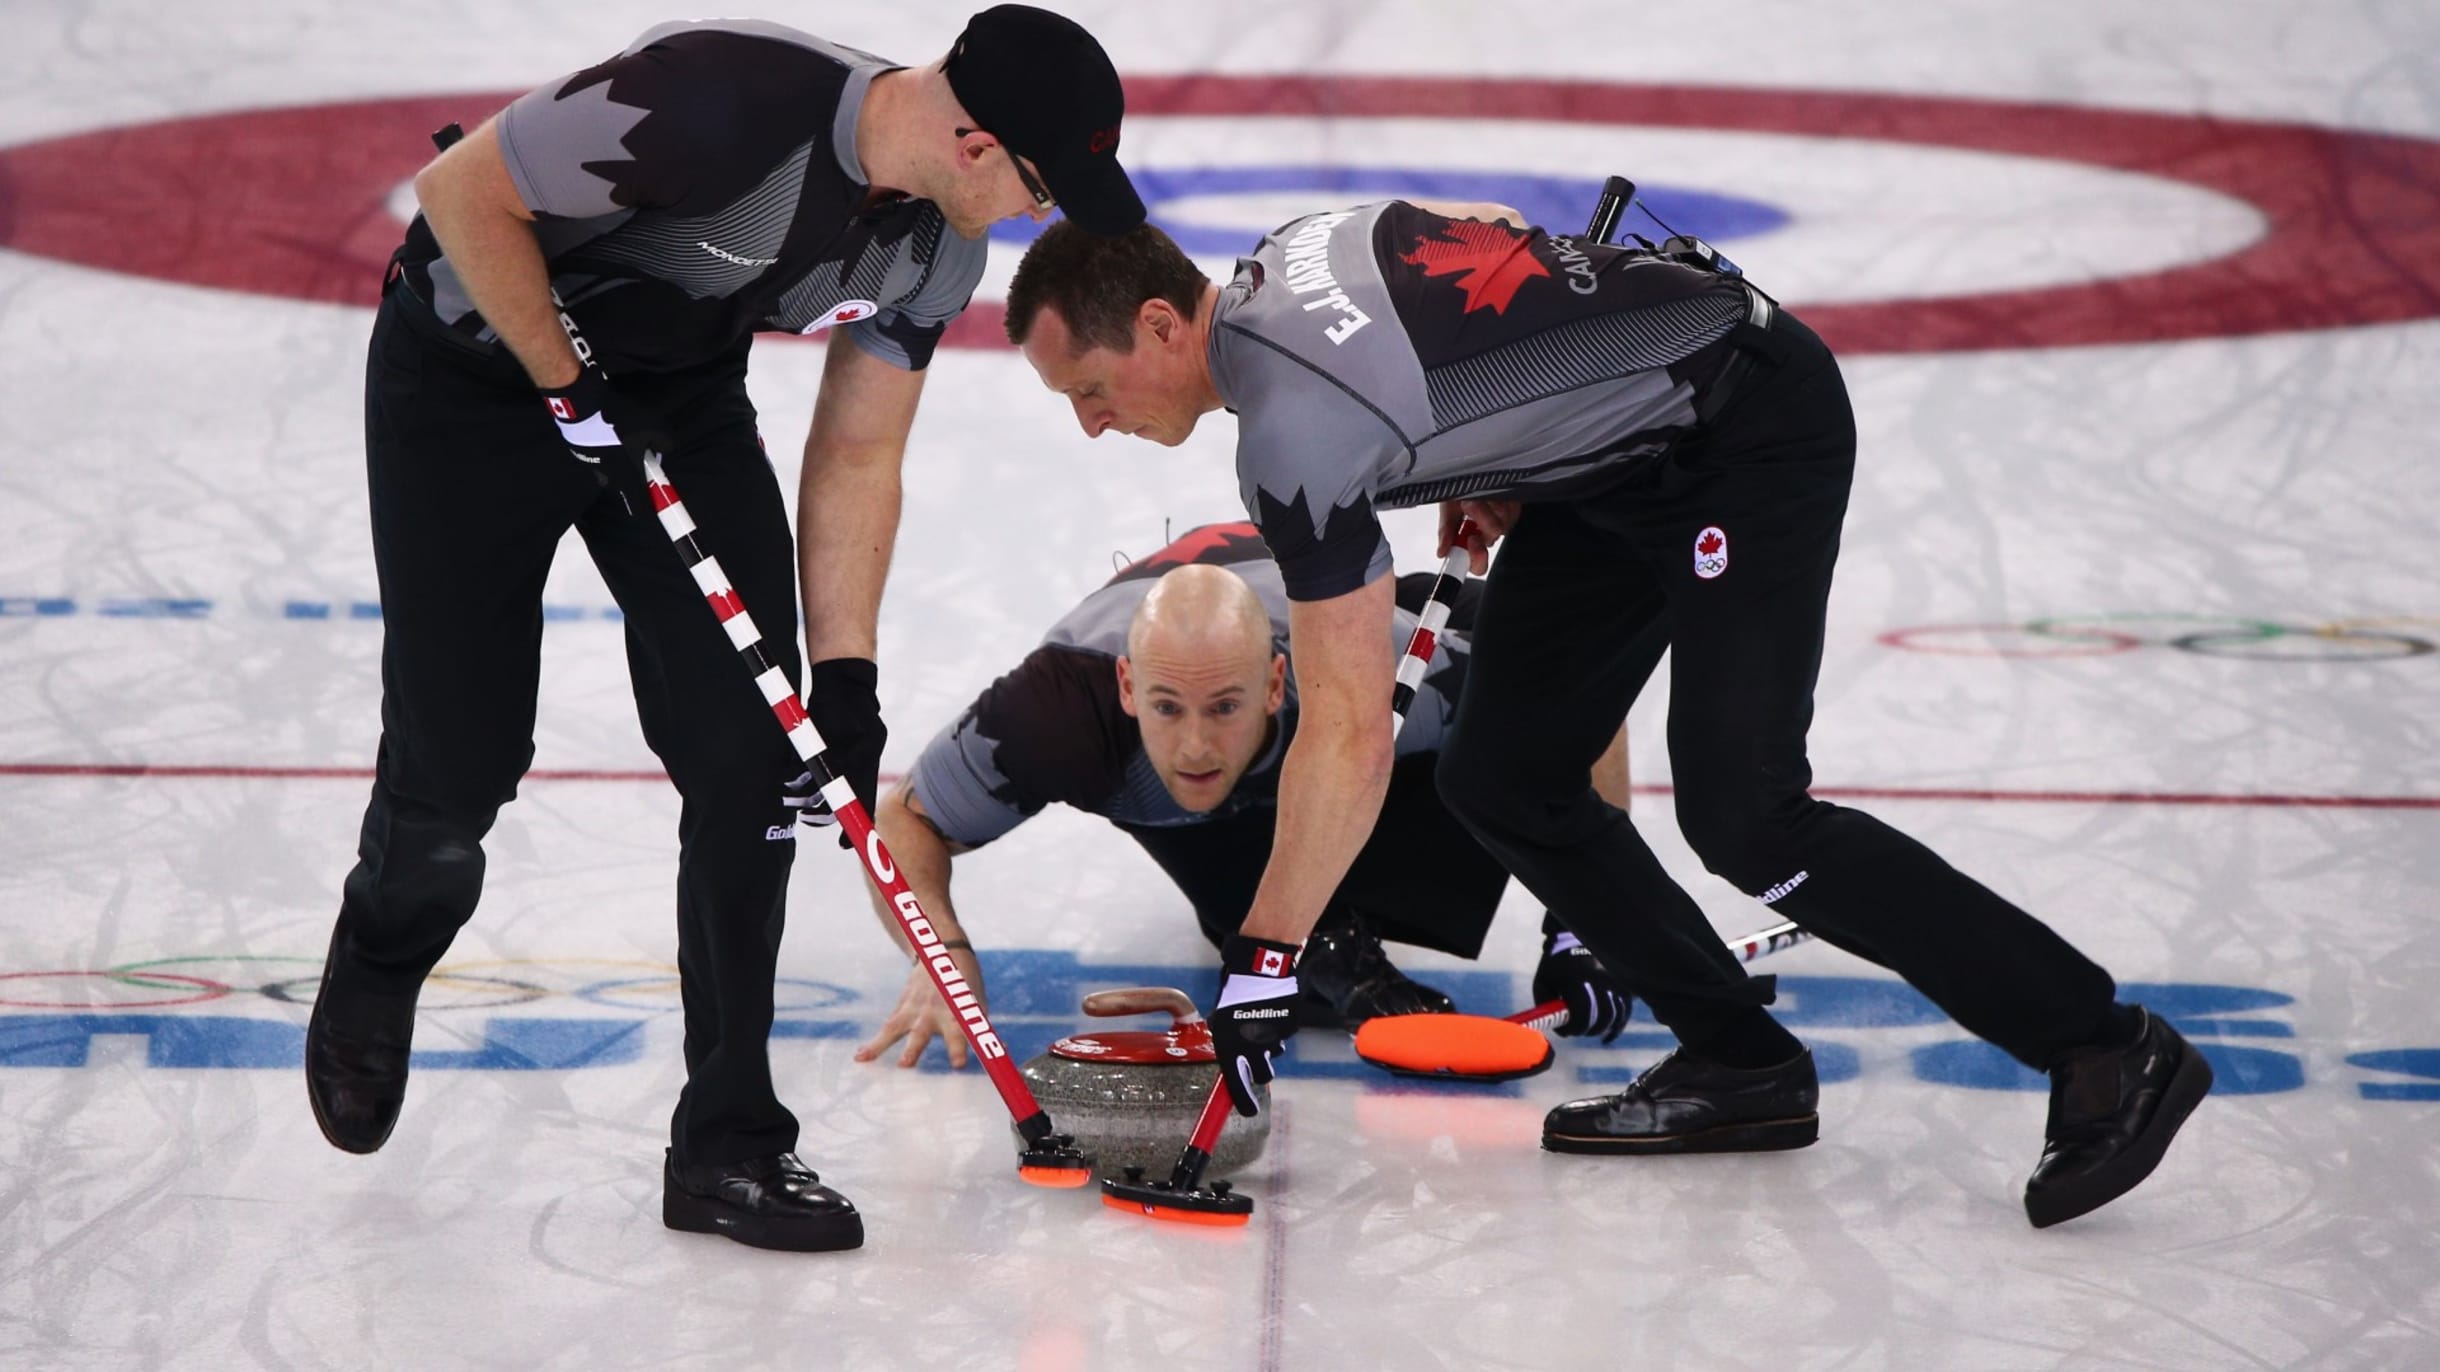 Olympic curling at Beijing 2022 Top five things to know